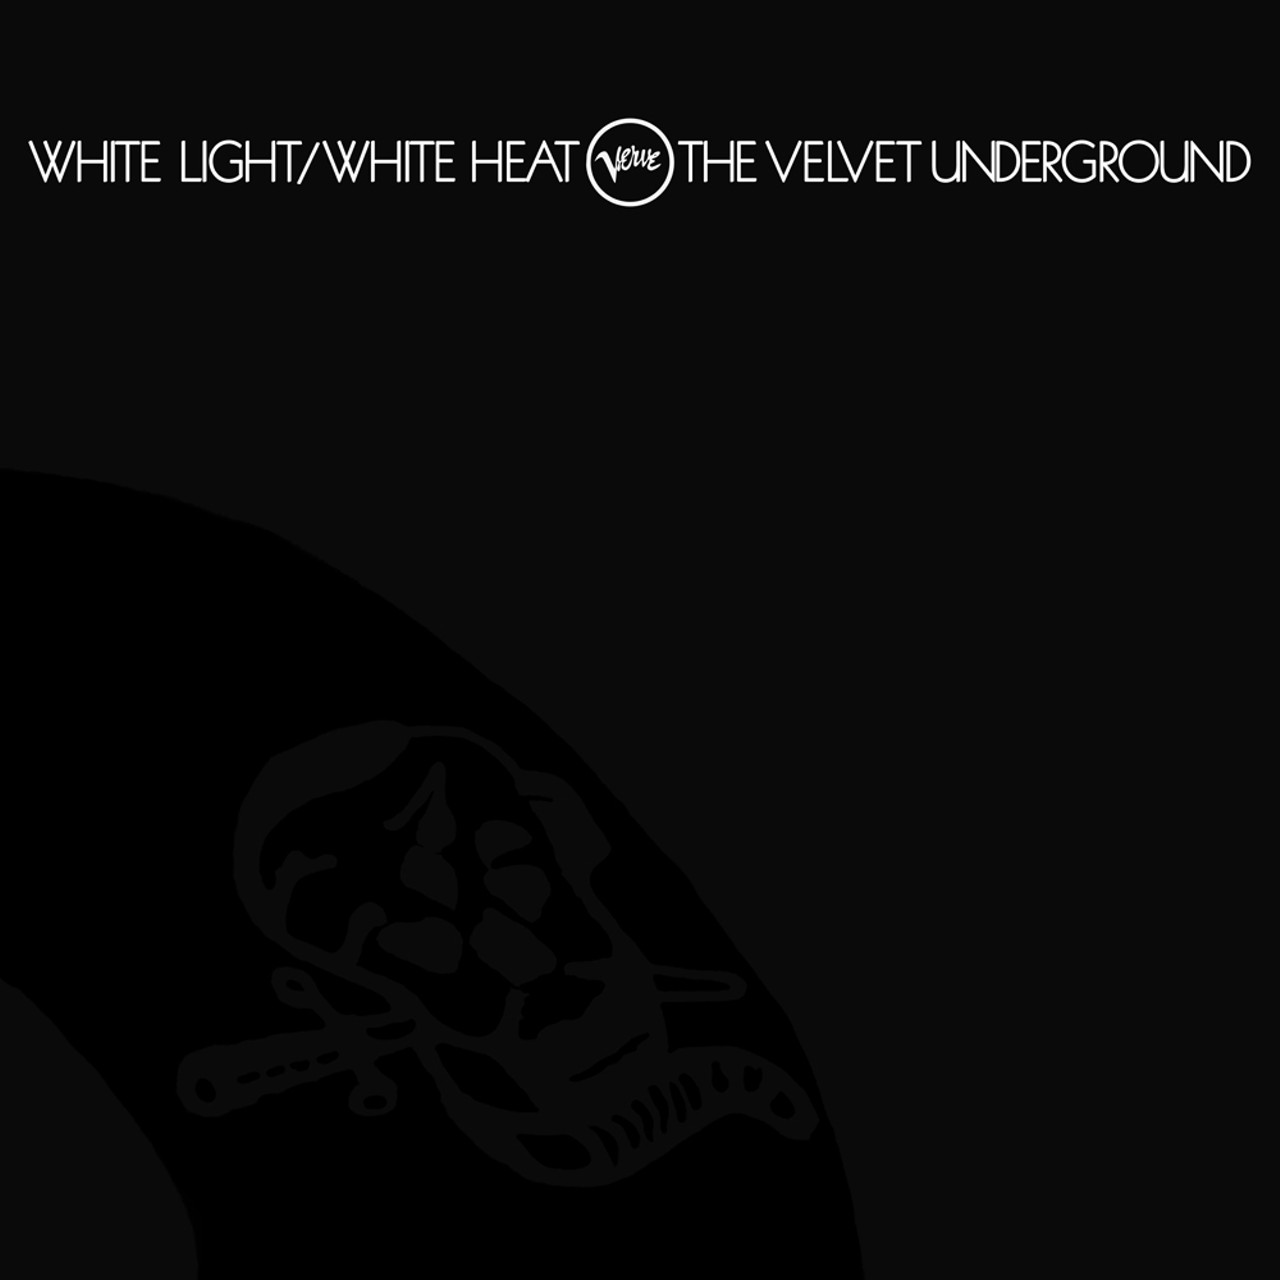 White Light/White Heat
Exemplary musicianship played second fiddle to mood, poetic lyrics and, thanks in part to Andy Warhol, a whole lot of style.